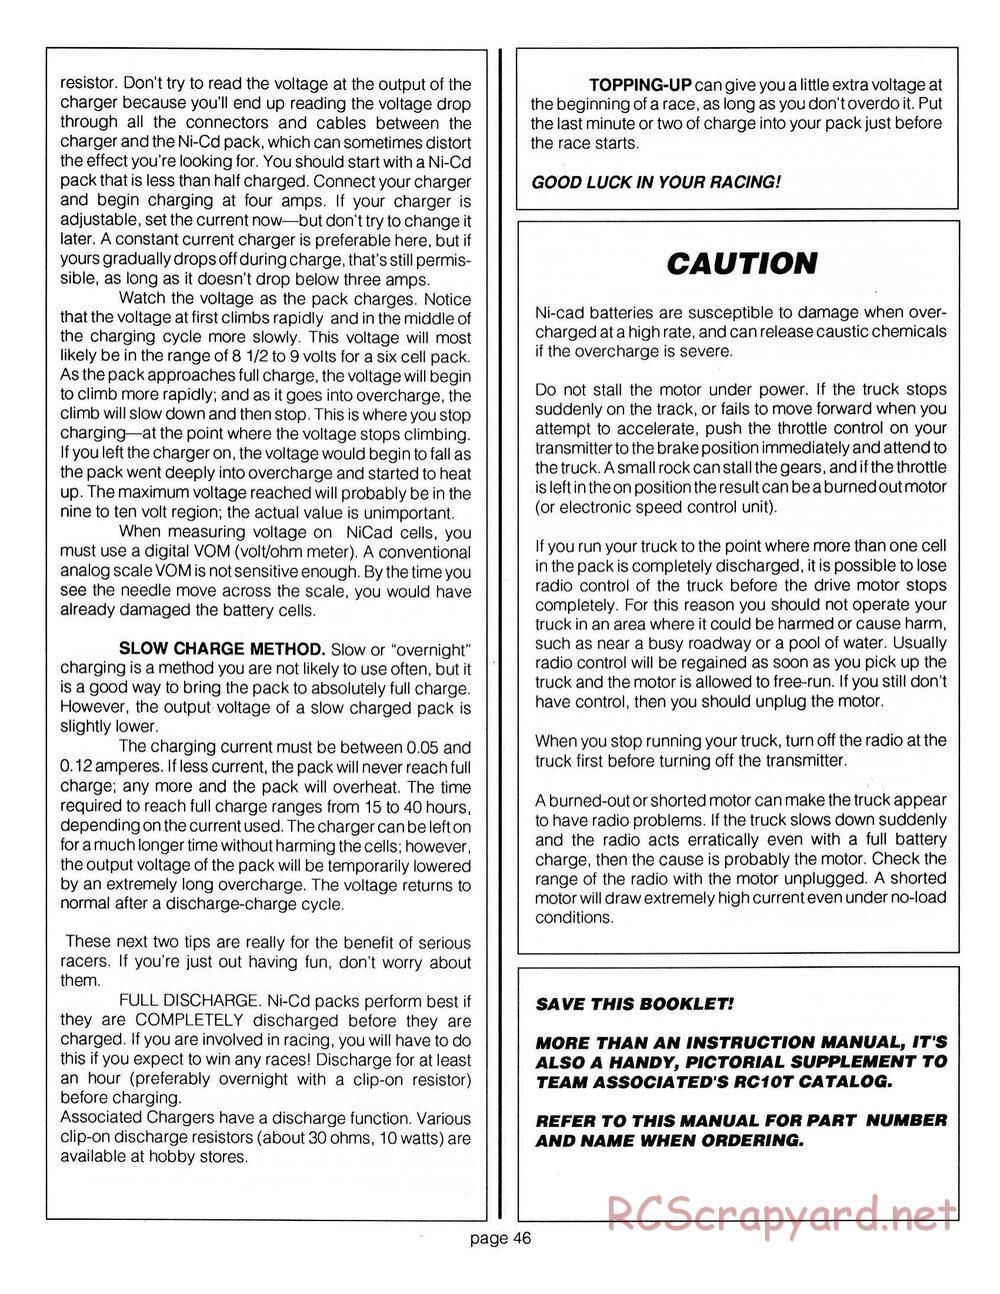 Team Associated - RC10T - Manual - Page 45